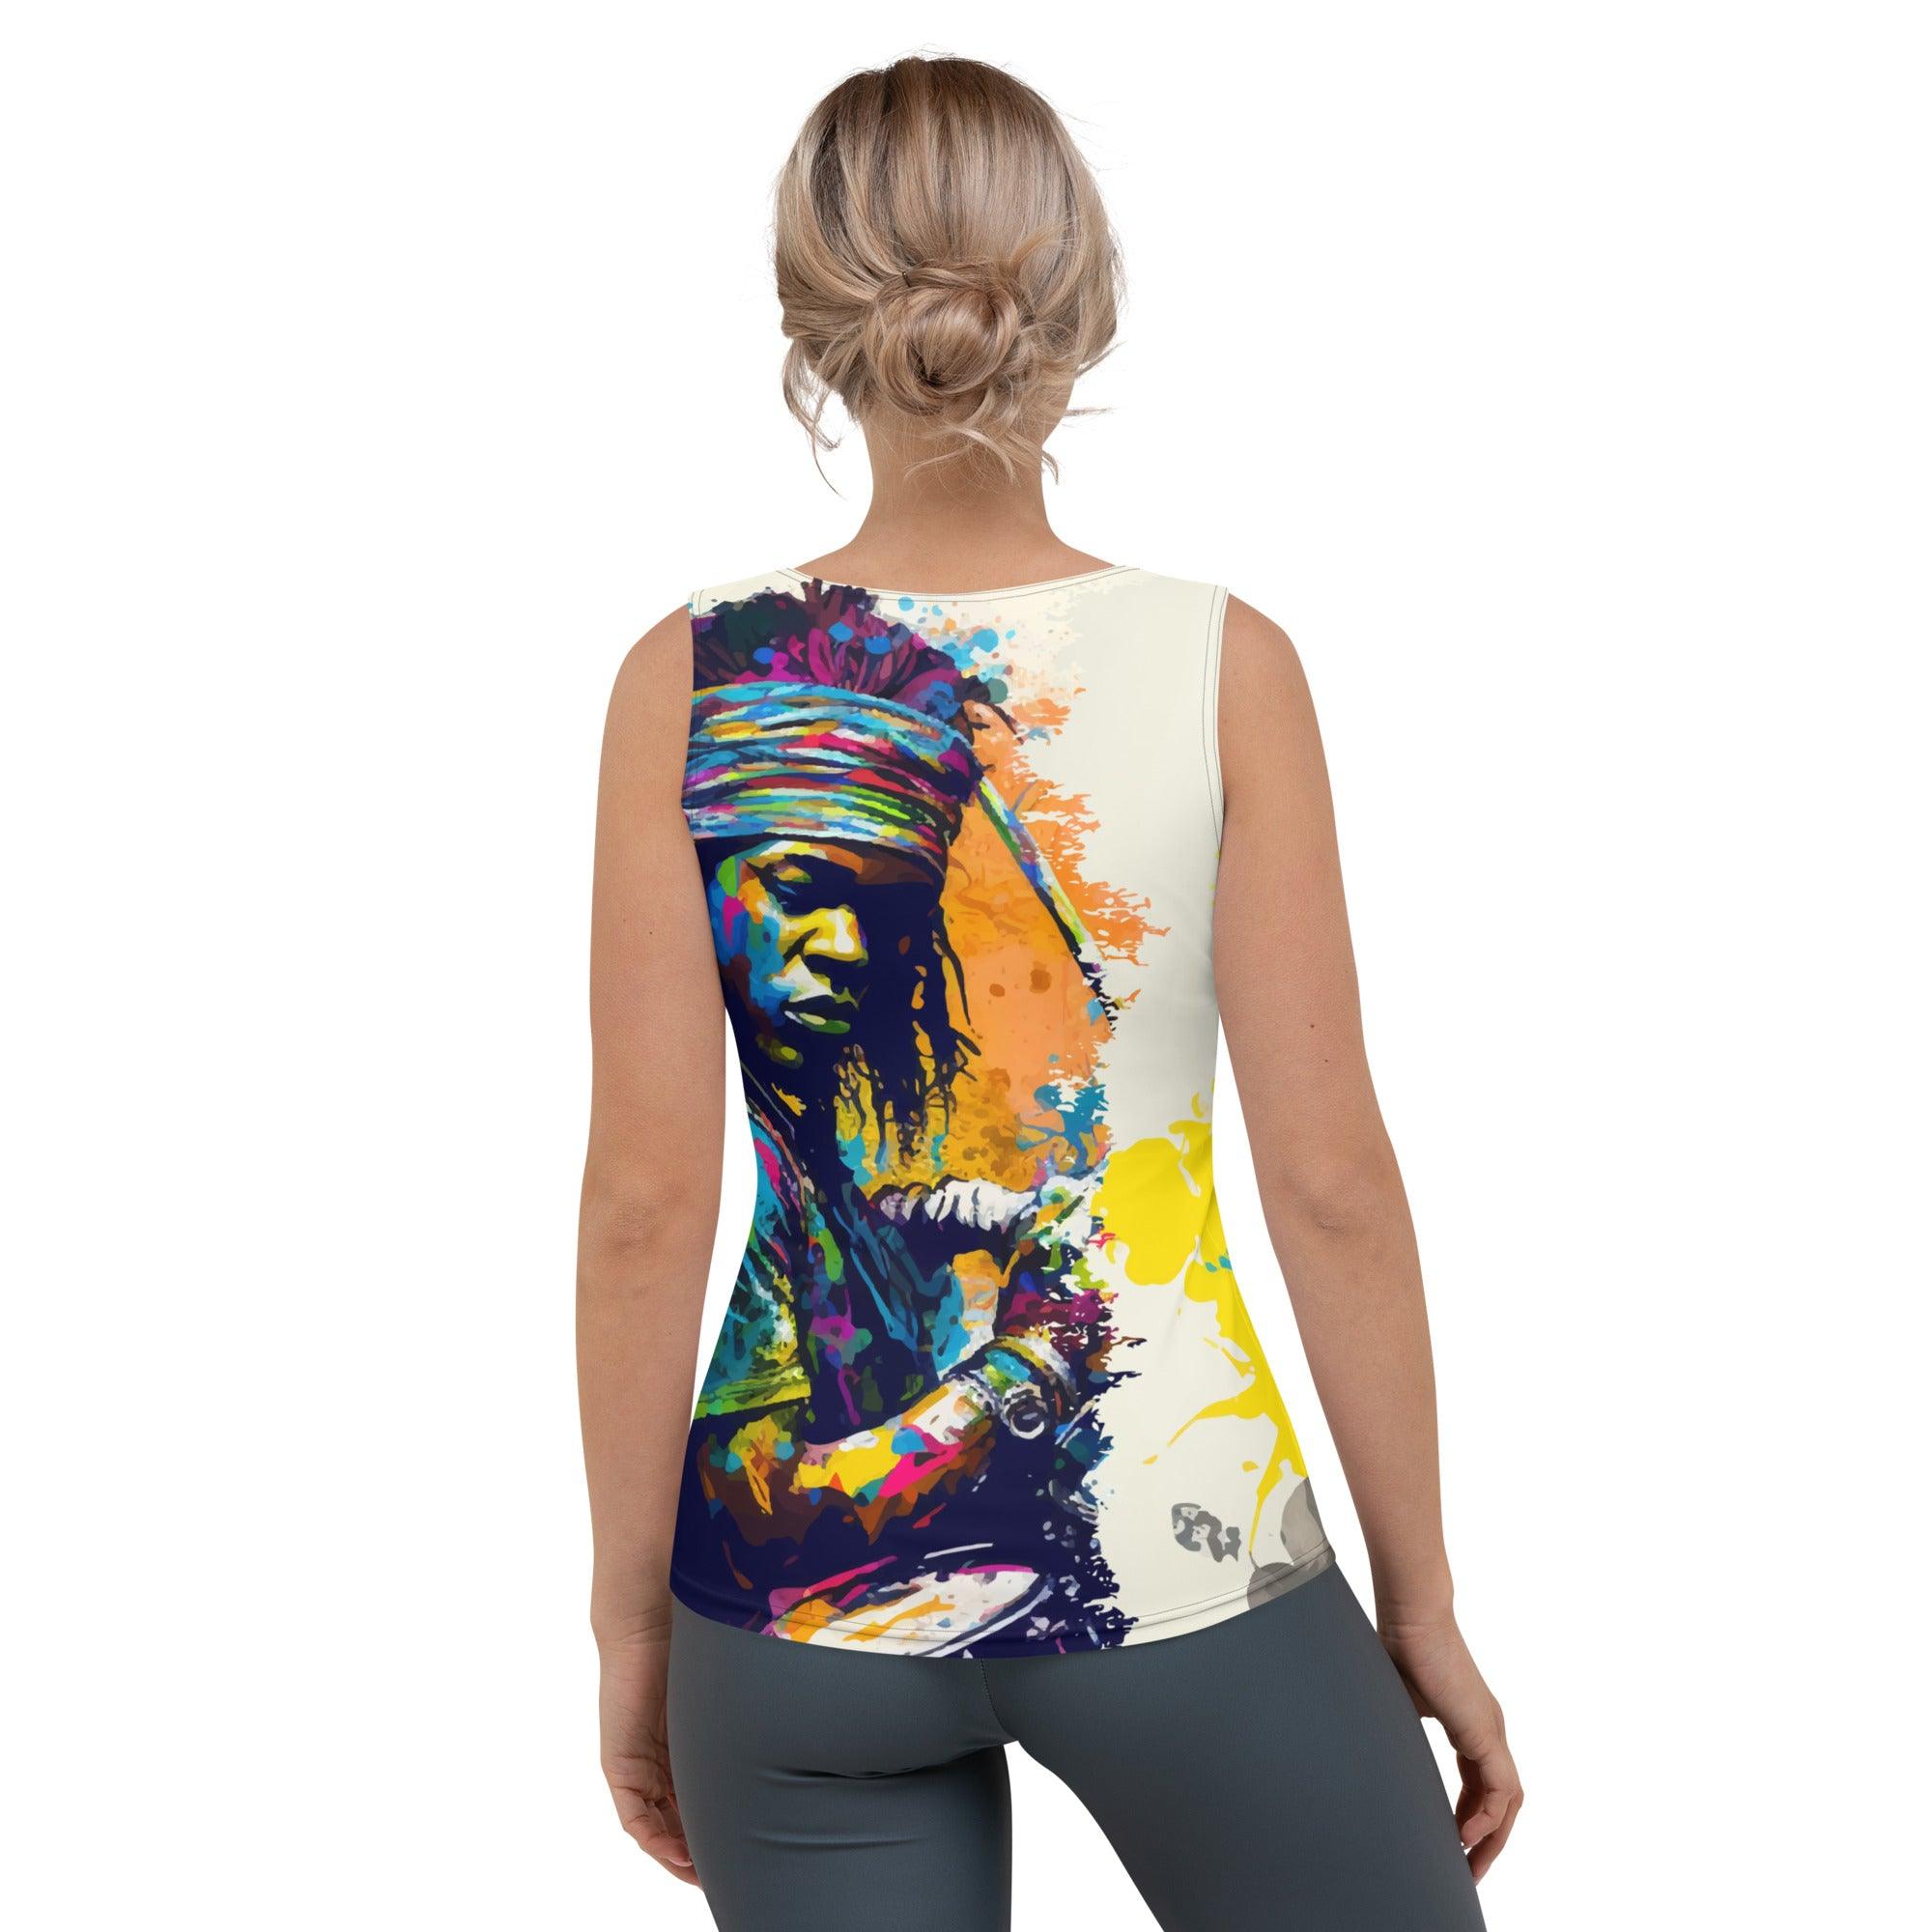 Pounding The Skins Hard Sublimation Cut & Sew Tank Top - Beyond T-shirts